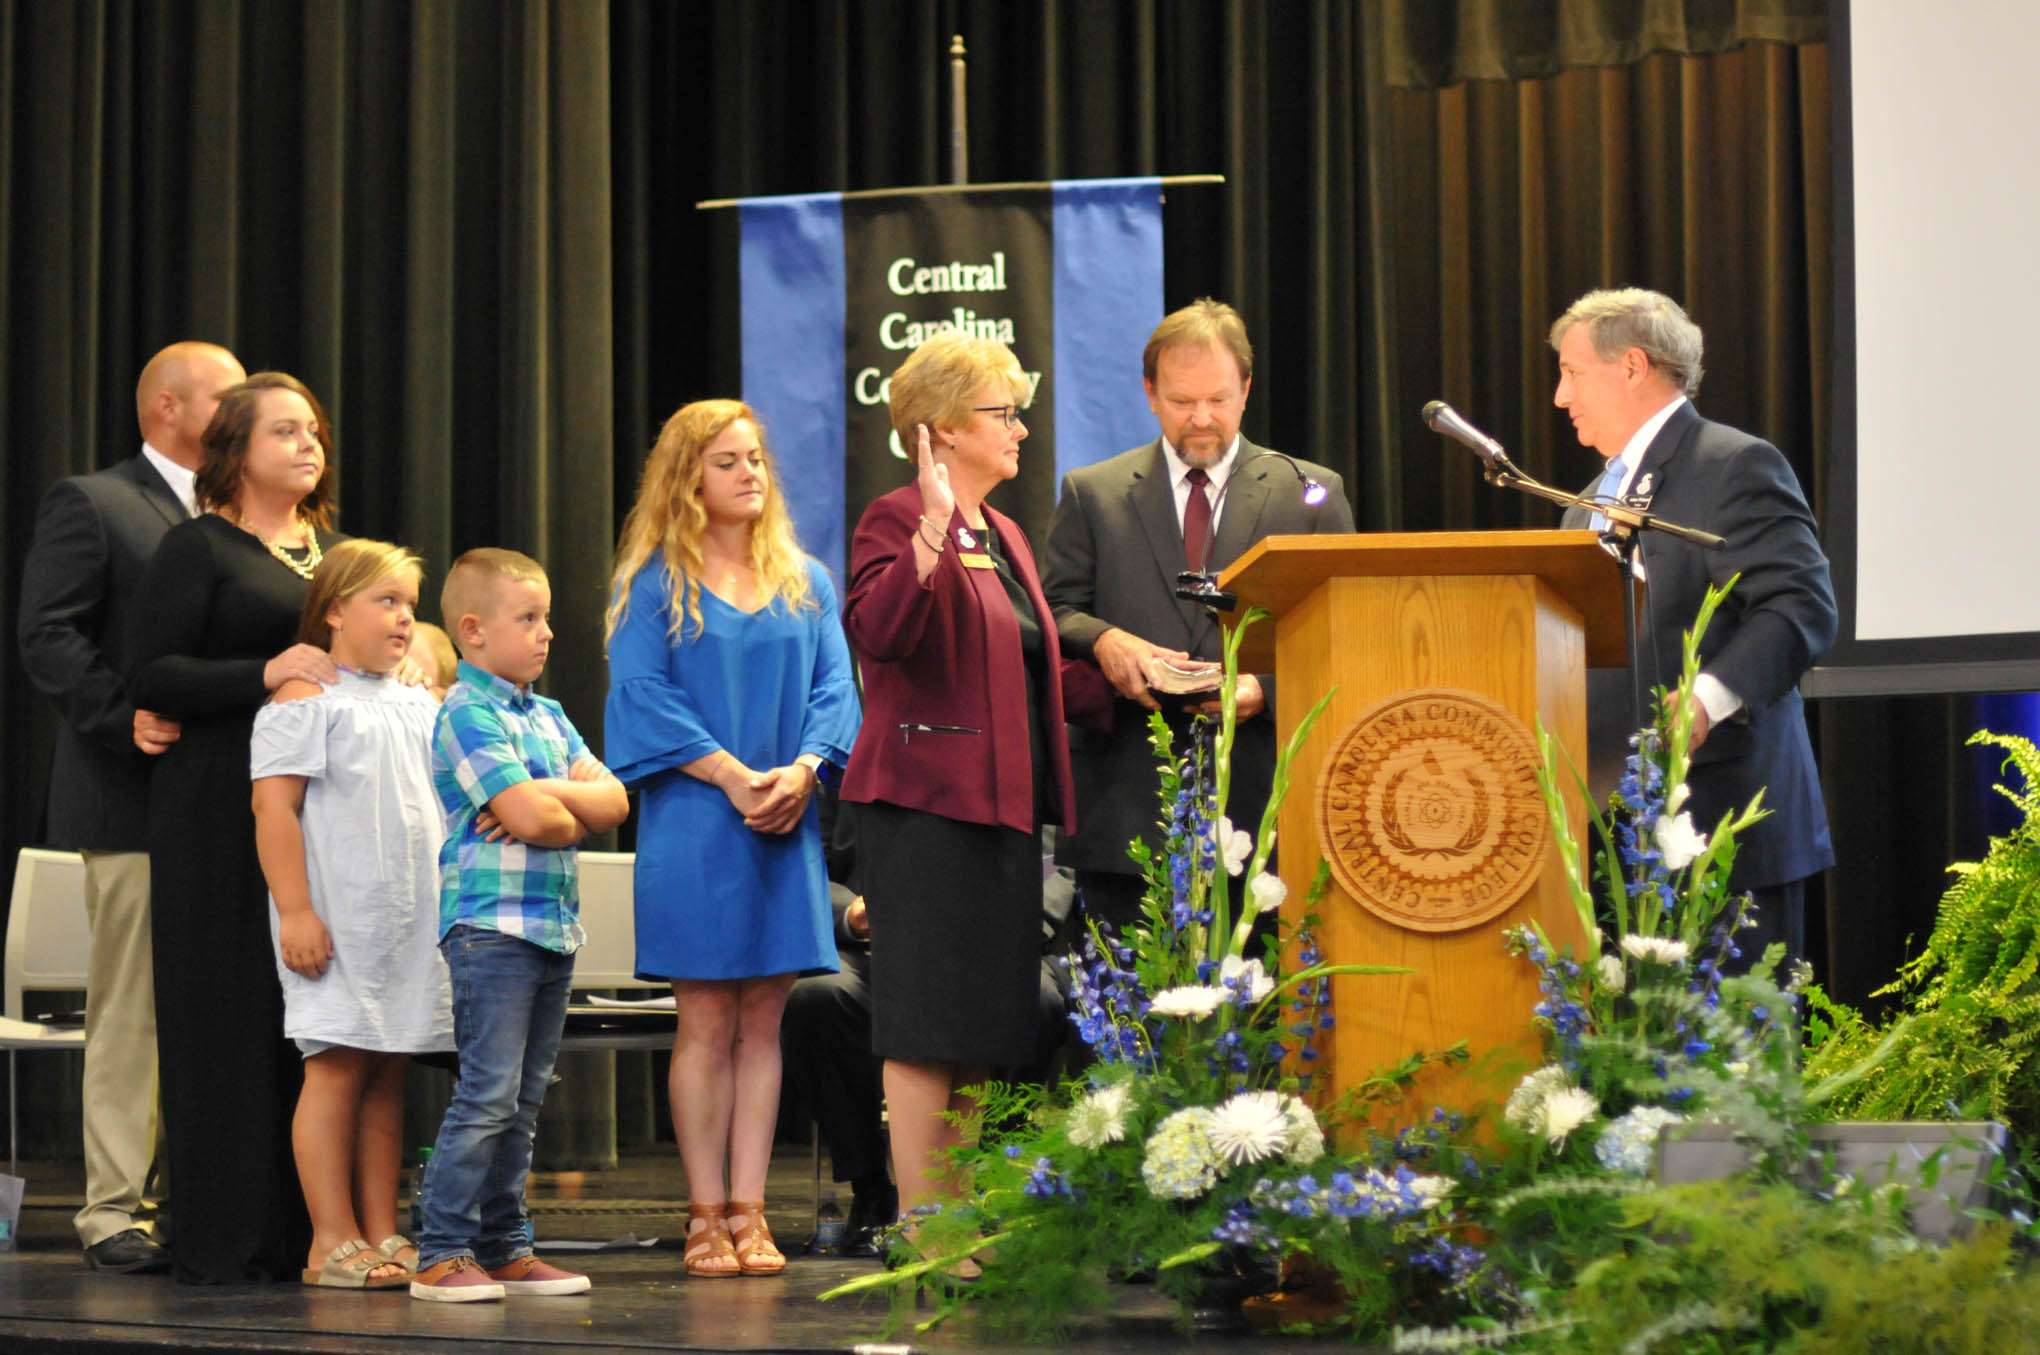 Click to enlarge,  Central Carolina Community College President Dr. Lisa M. Chapman receives the Oath of Office from Julian Philpott, Chairman of the CCCC Board of Trustees, as Dr. Chapman's family joins her on stage for her Installation as CCCC President on Sept. 26. 